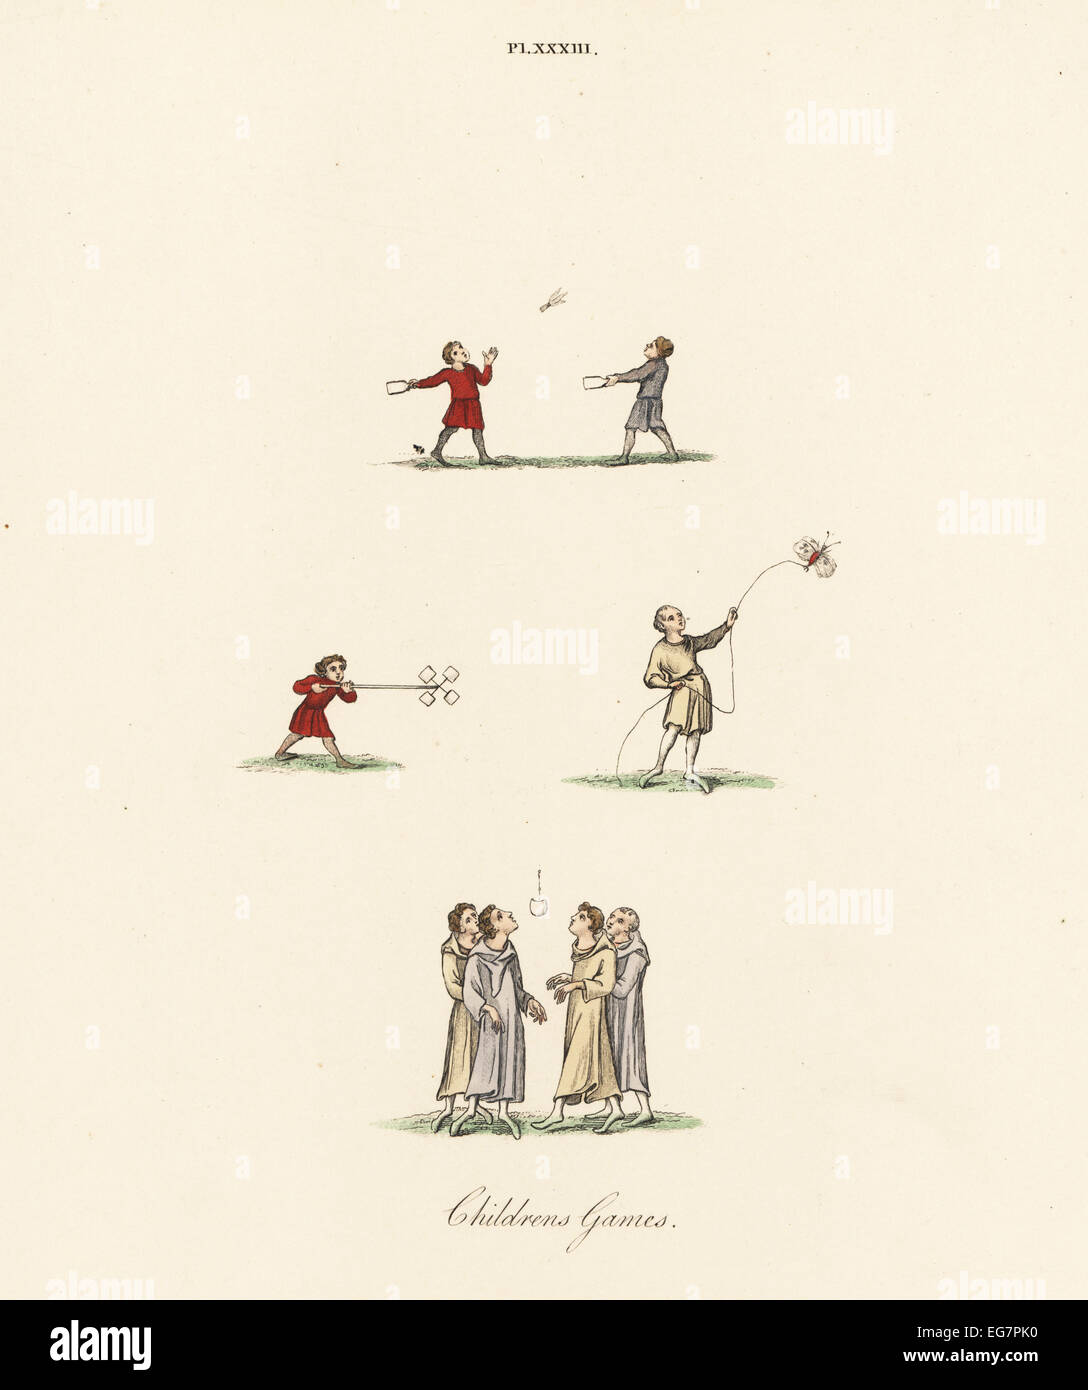 Medieval children's games: badminton, windmill, and bob-cherry. Stock Photo